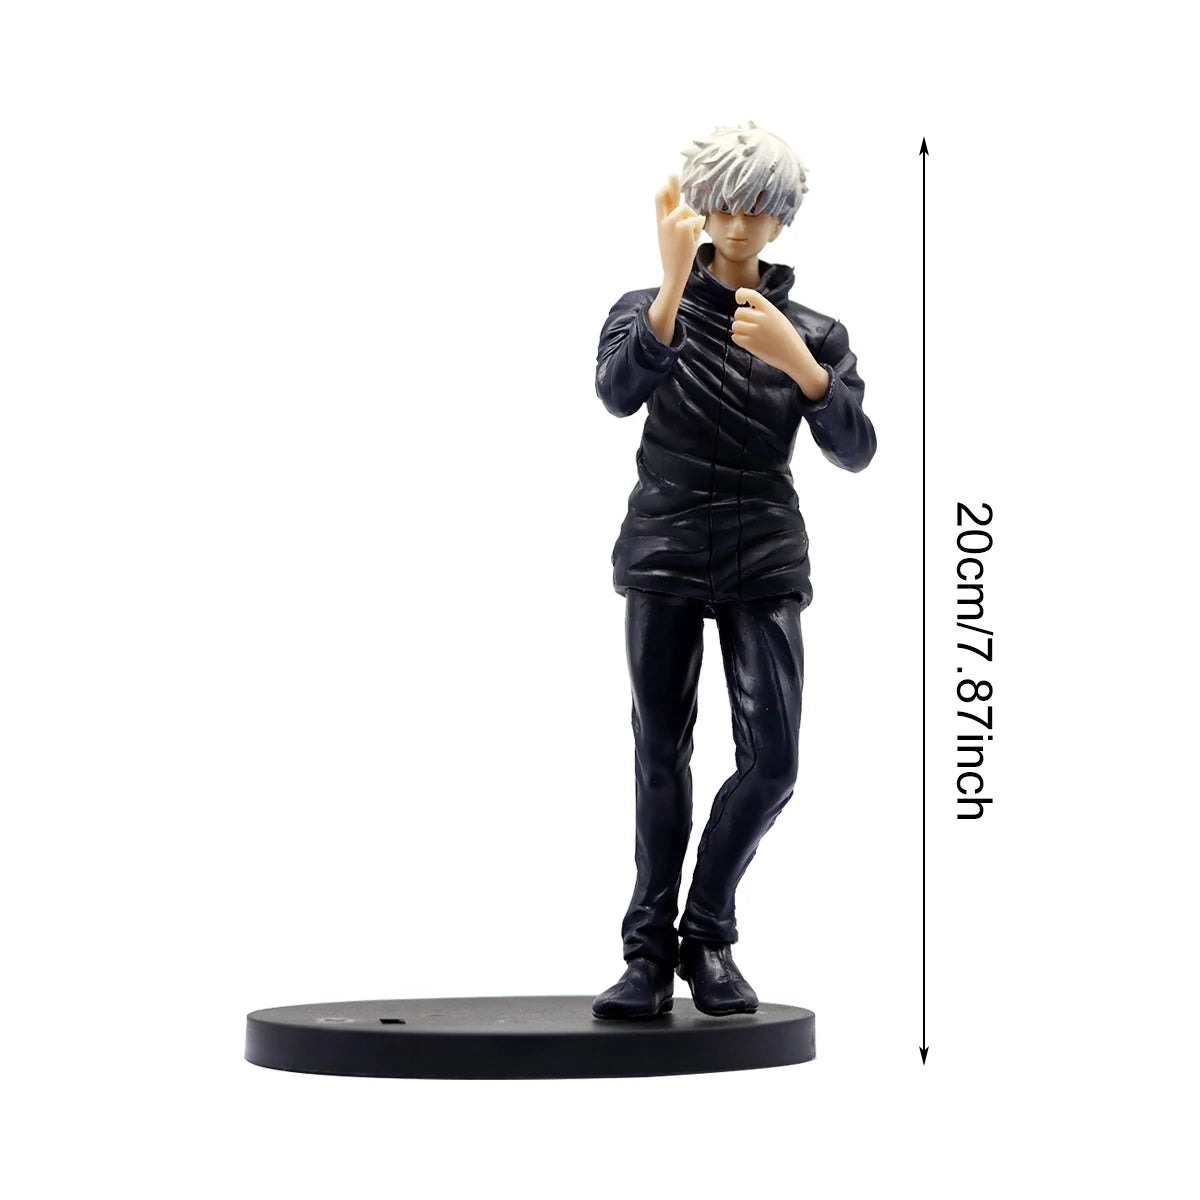 Cool Anime Figures Handsome Action Boys Decorative Ornaments Exquisite and Durable Home and Car Decorations Auto Accessories - IHavePaws